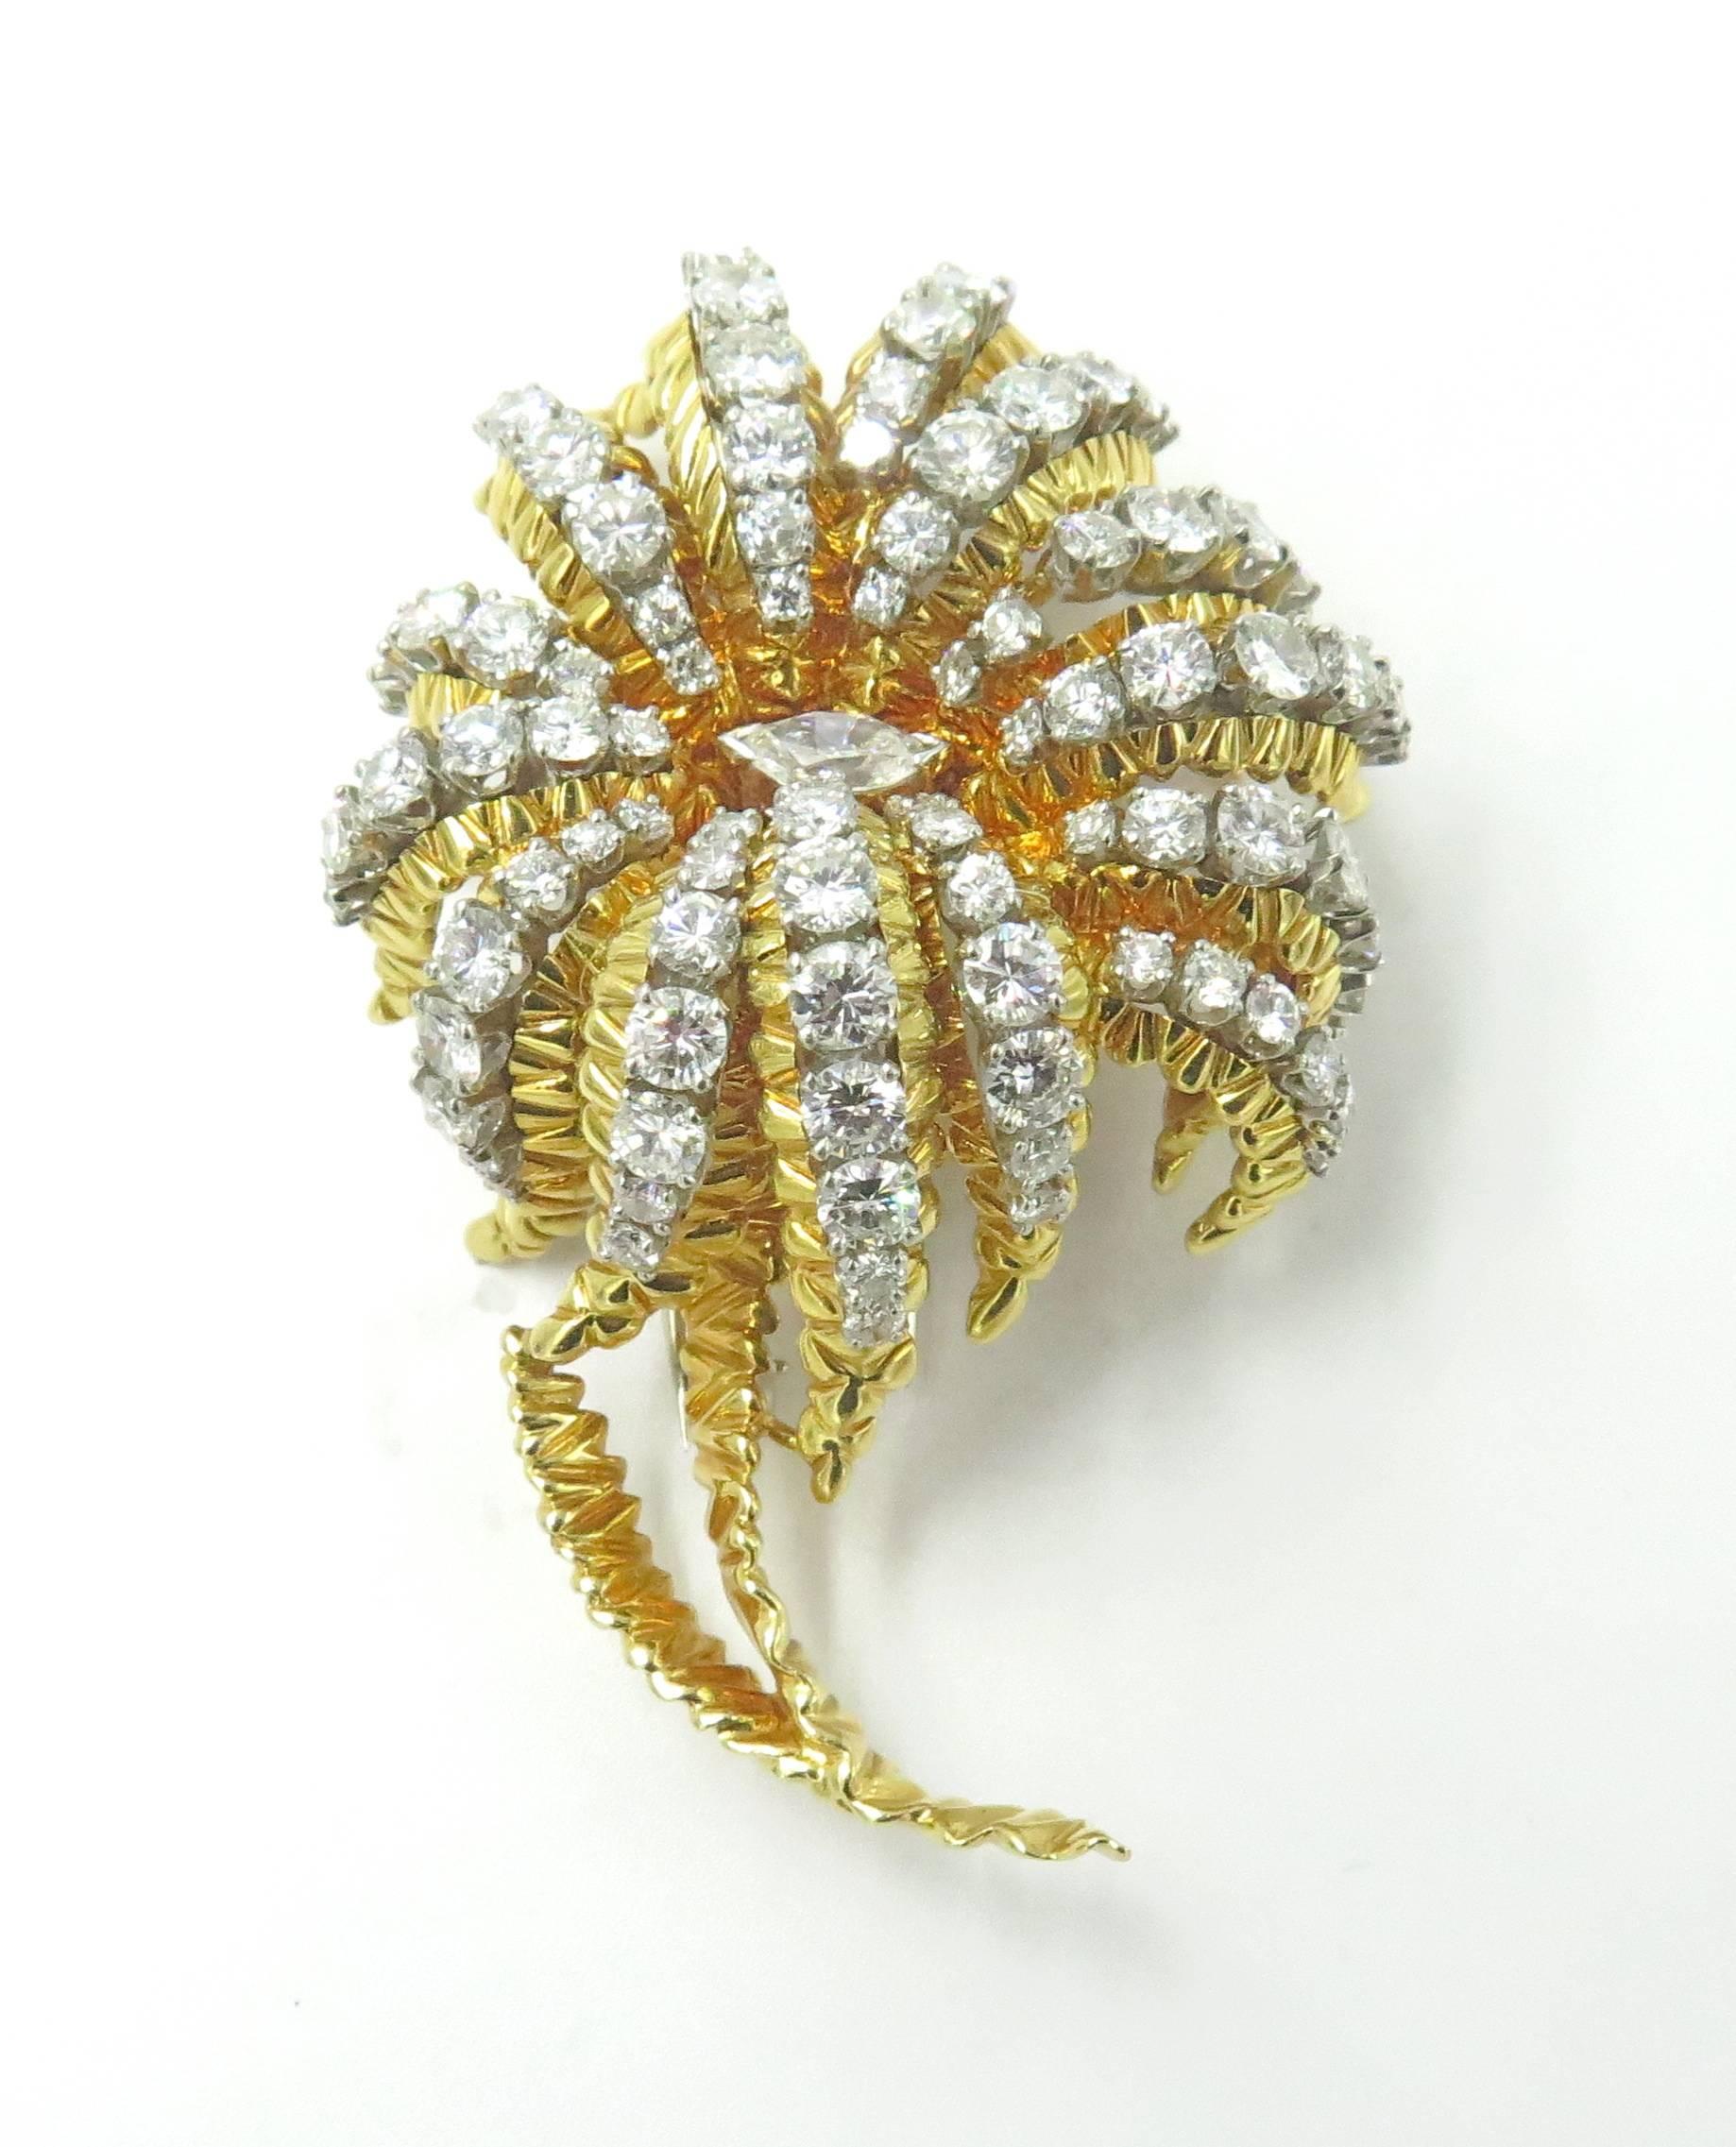 An 18 karat gold and diamond flower brooch, French. Circa 1960. Of textured gold design, the petals set with round brilliant-cut diamonds, centering a marquise-cut diamond. Ninety six (96) round and one (1) marquise-cut diamond, weigh approximately